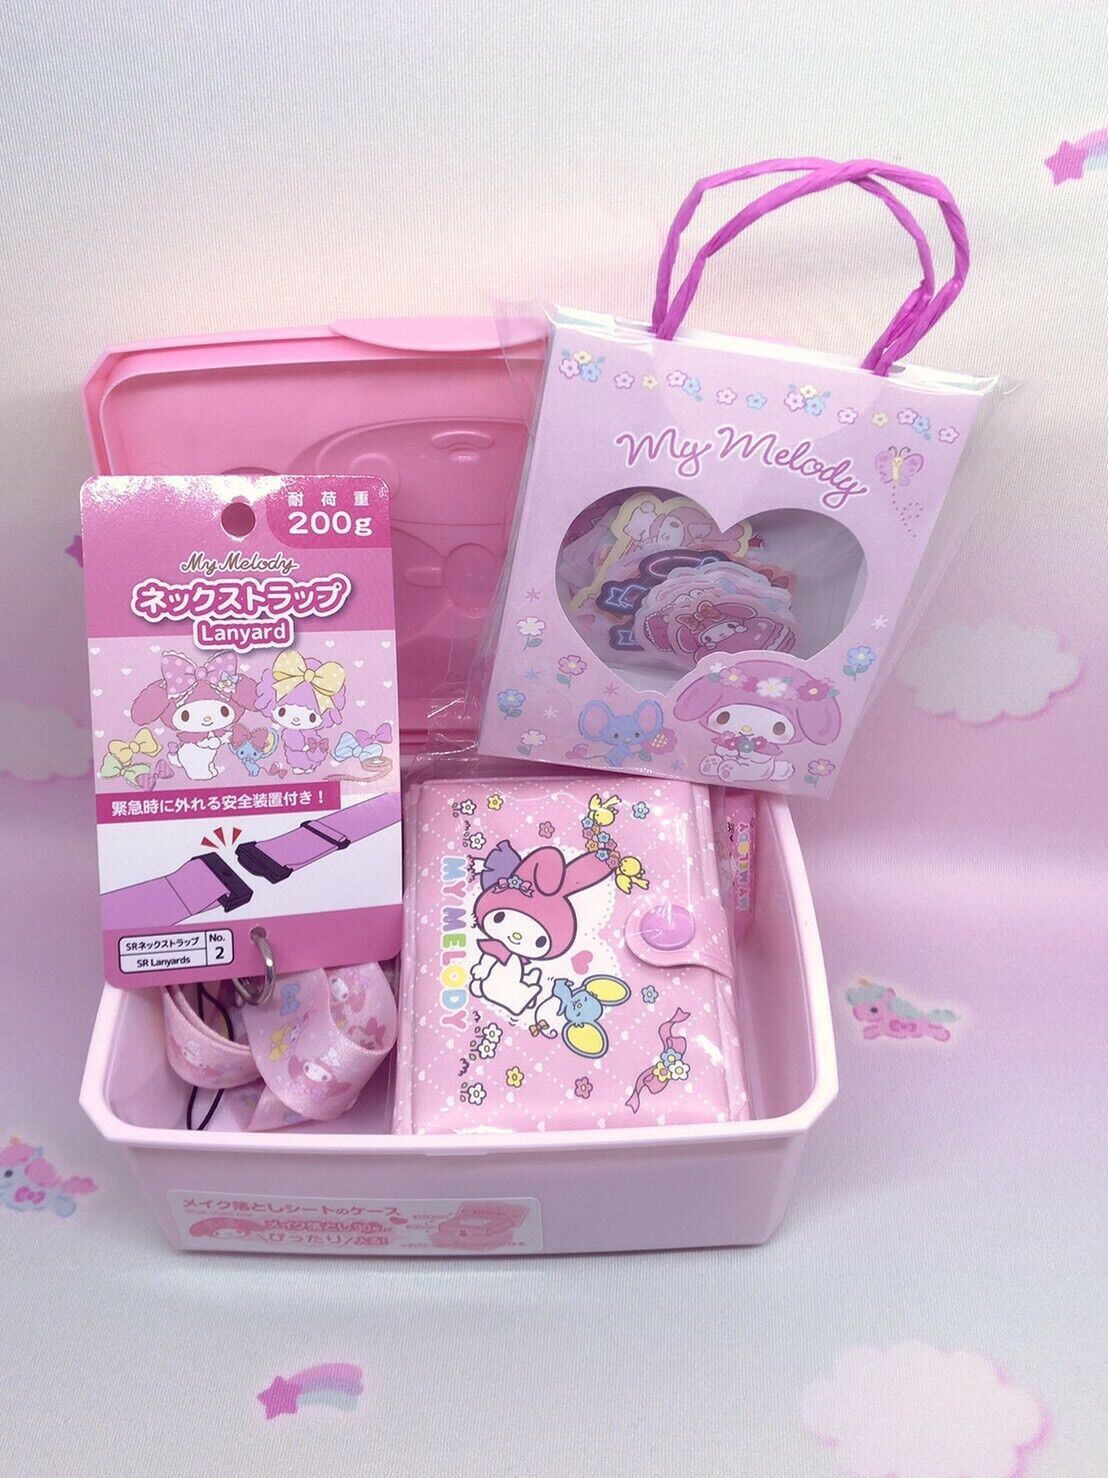 My Melody edition makeup Box Get 25% OFF with Coupon code “BOX-EDITION”